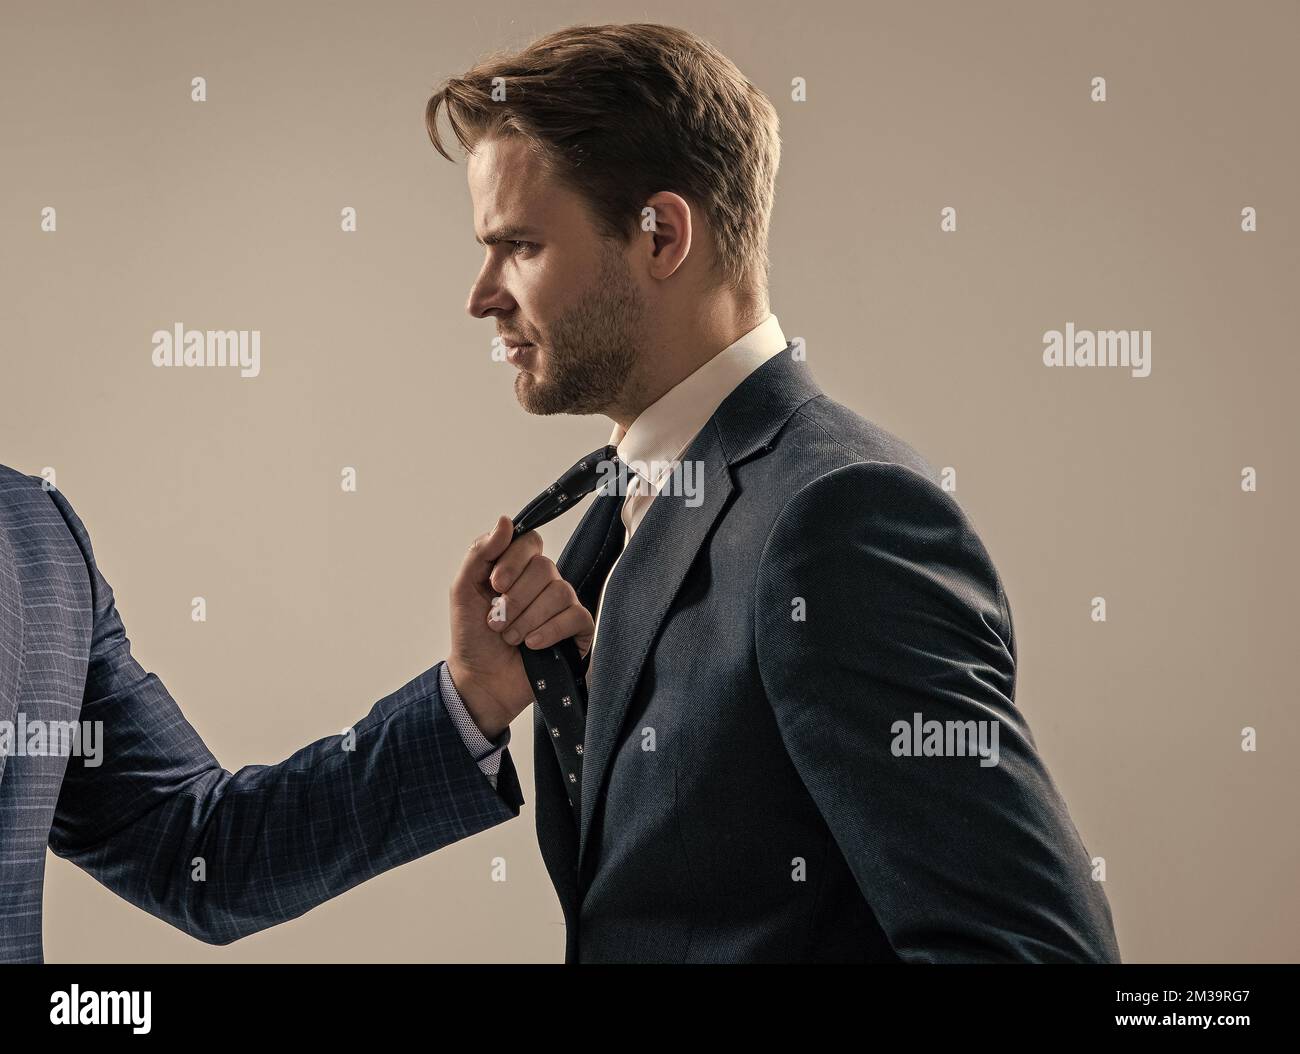 Conflict at work. Employee being pulled by necktie. Physical conflict. Workplace aggression Stock Photo